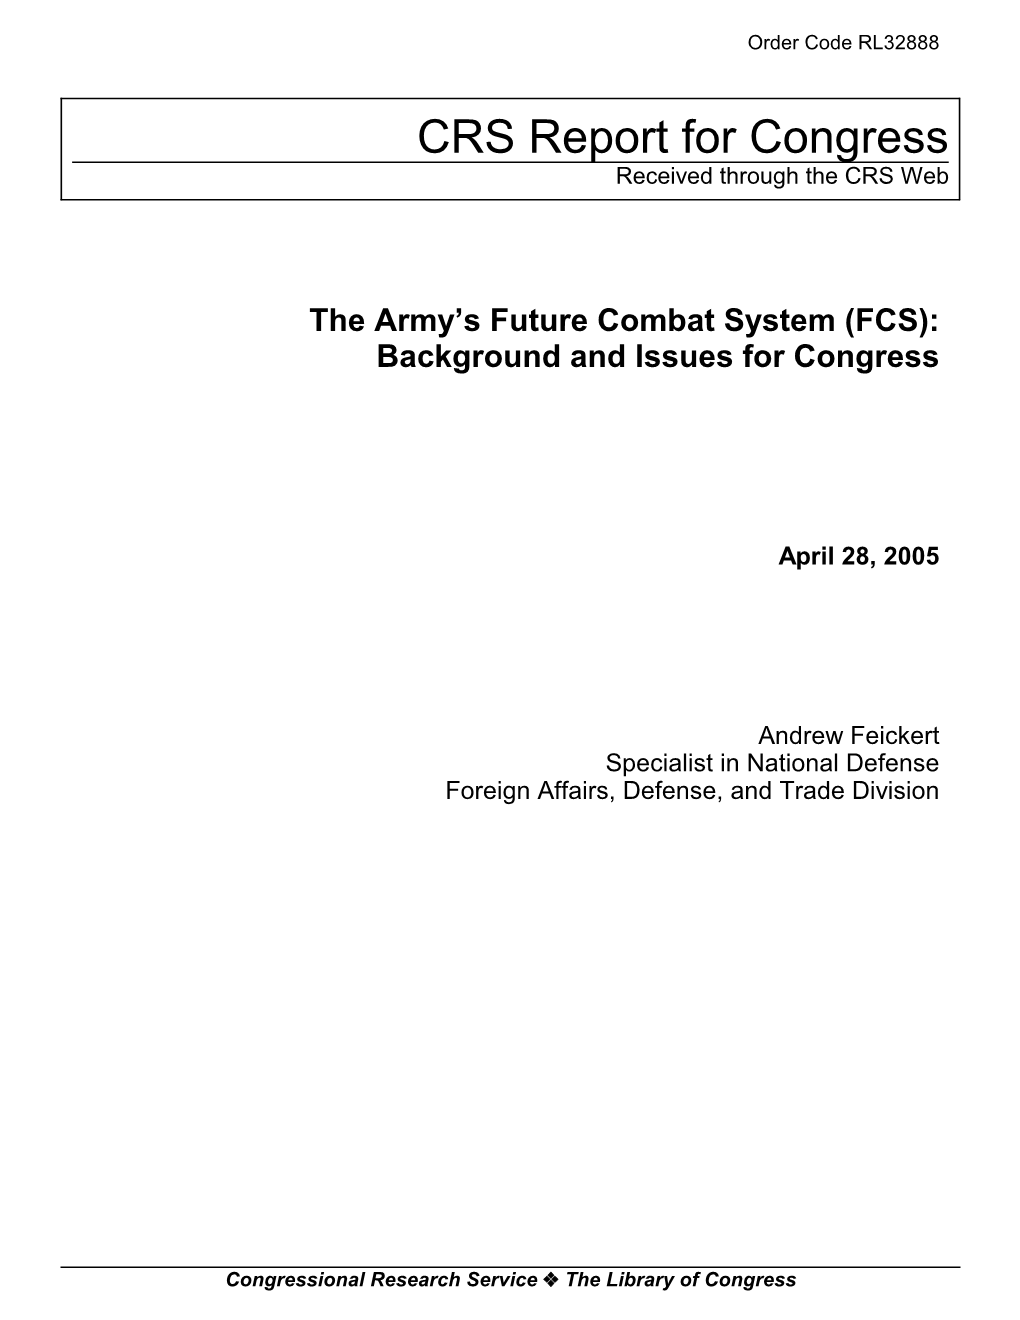 The Army's Future Combat System (FCS)